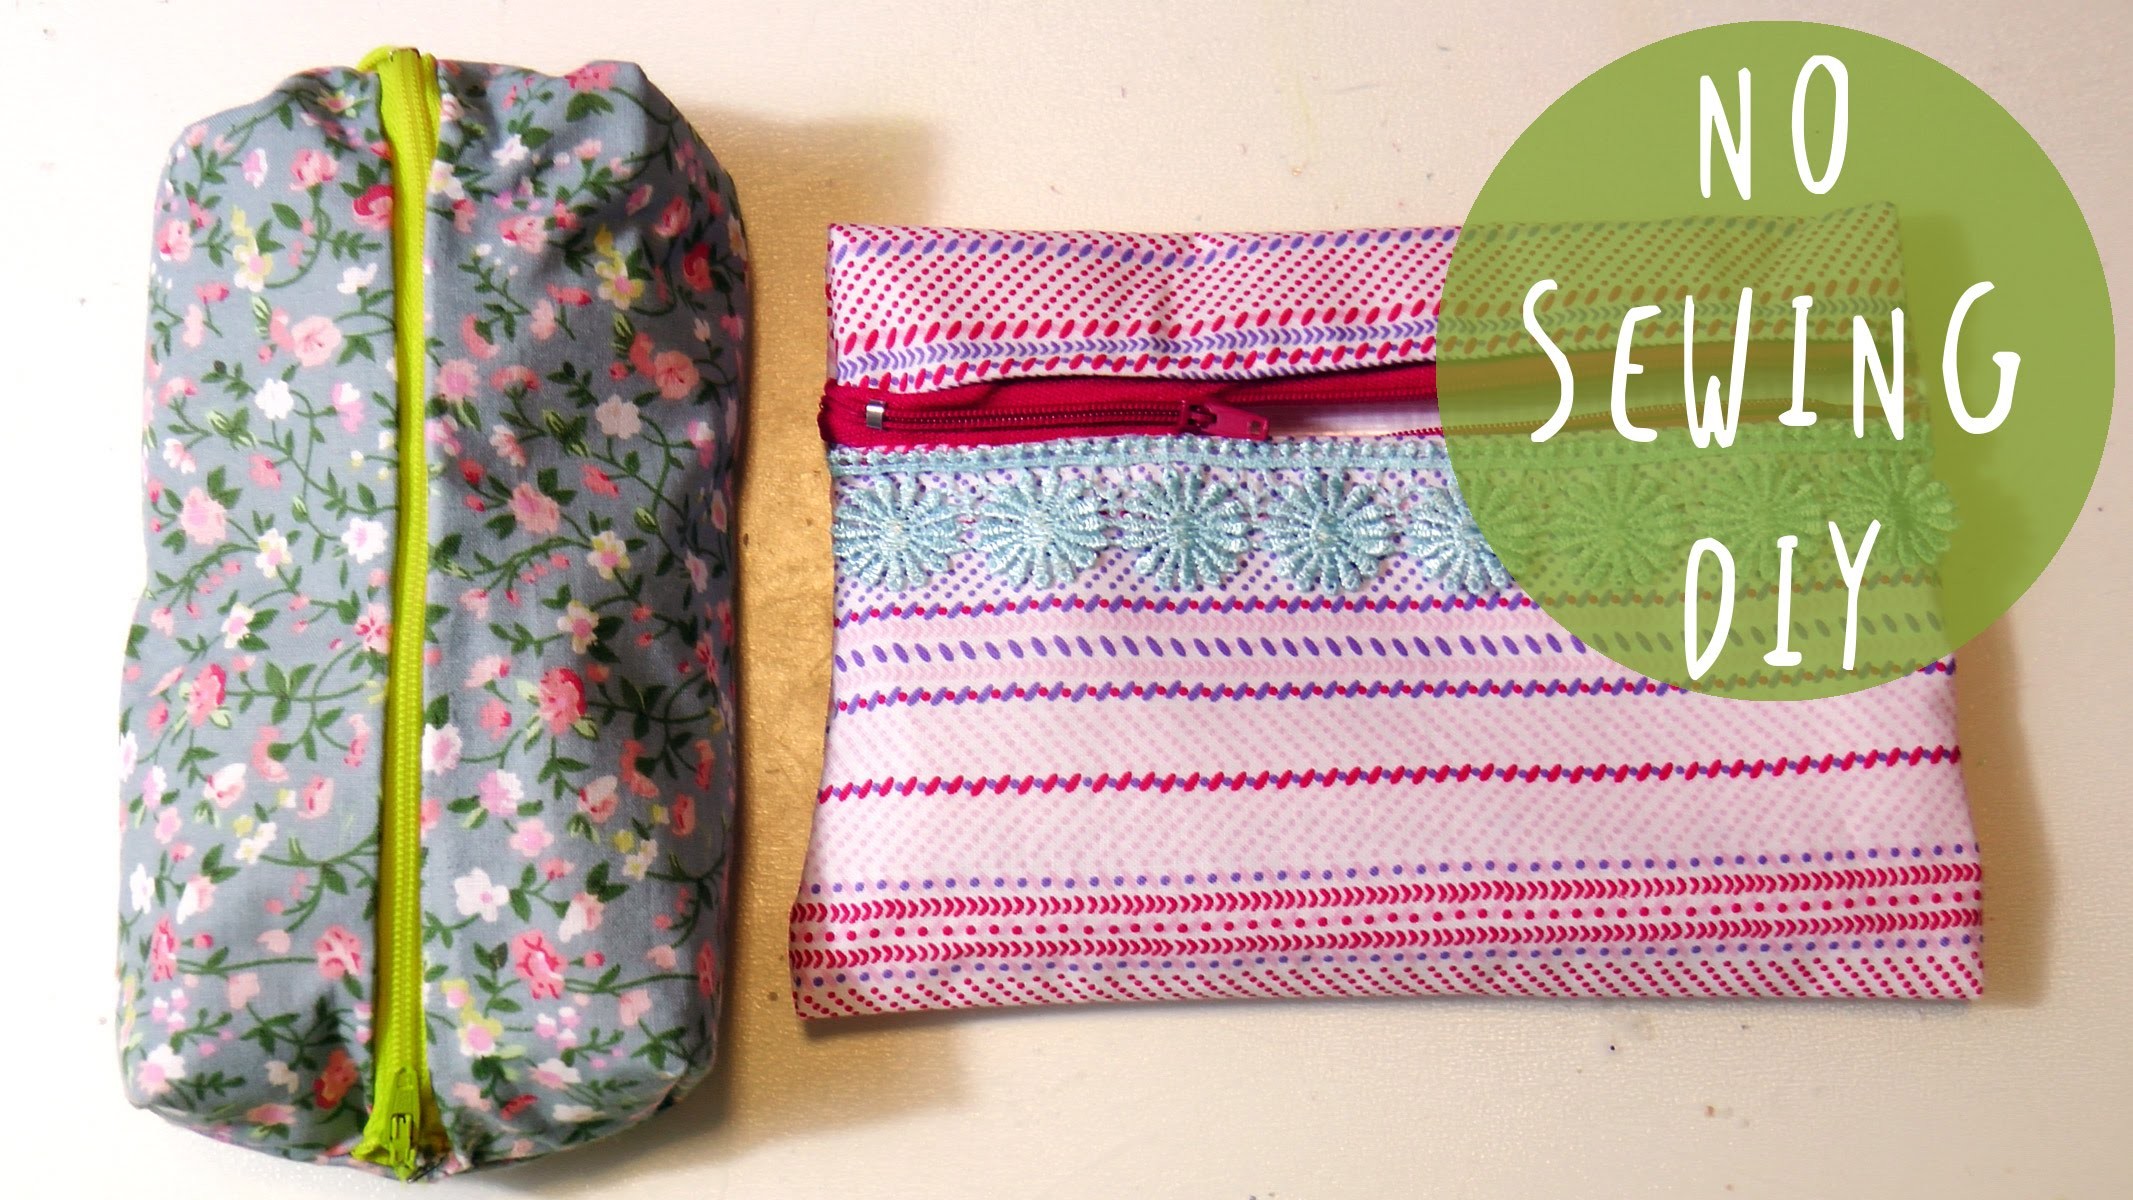 DIY Back to School Tutorial: How to make a PENCIL CASE 3 design and NO SEW by ART Tv